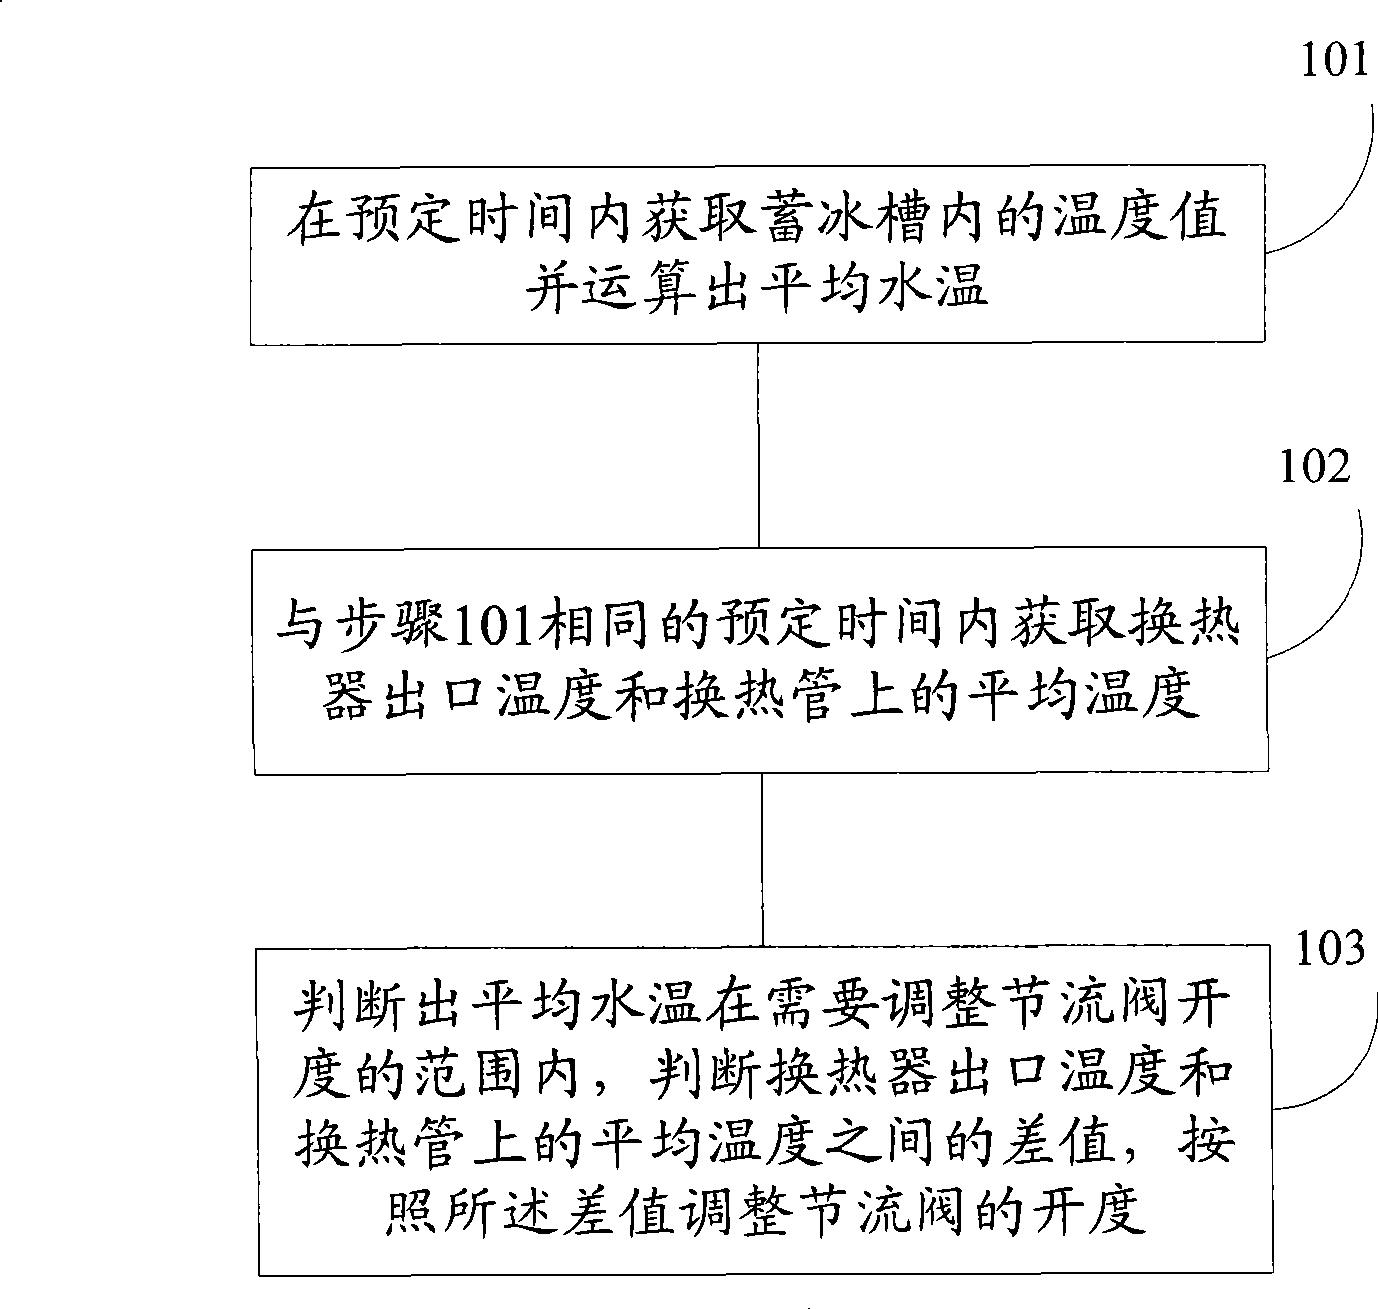 Refrigerant flow control method and device for fixed-frequency ice-accumulation air-conditioning unit